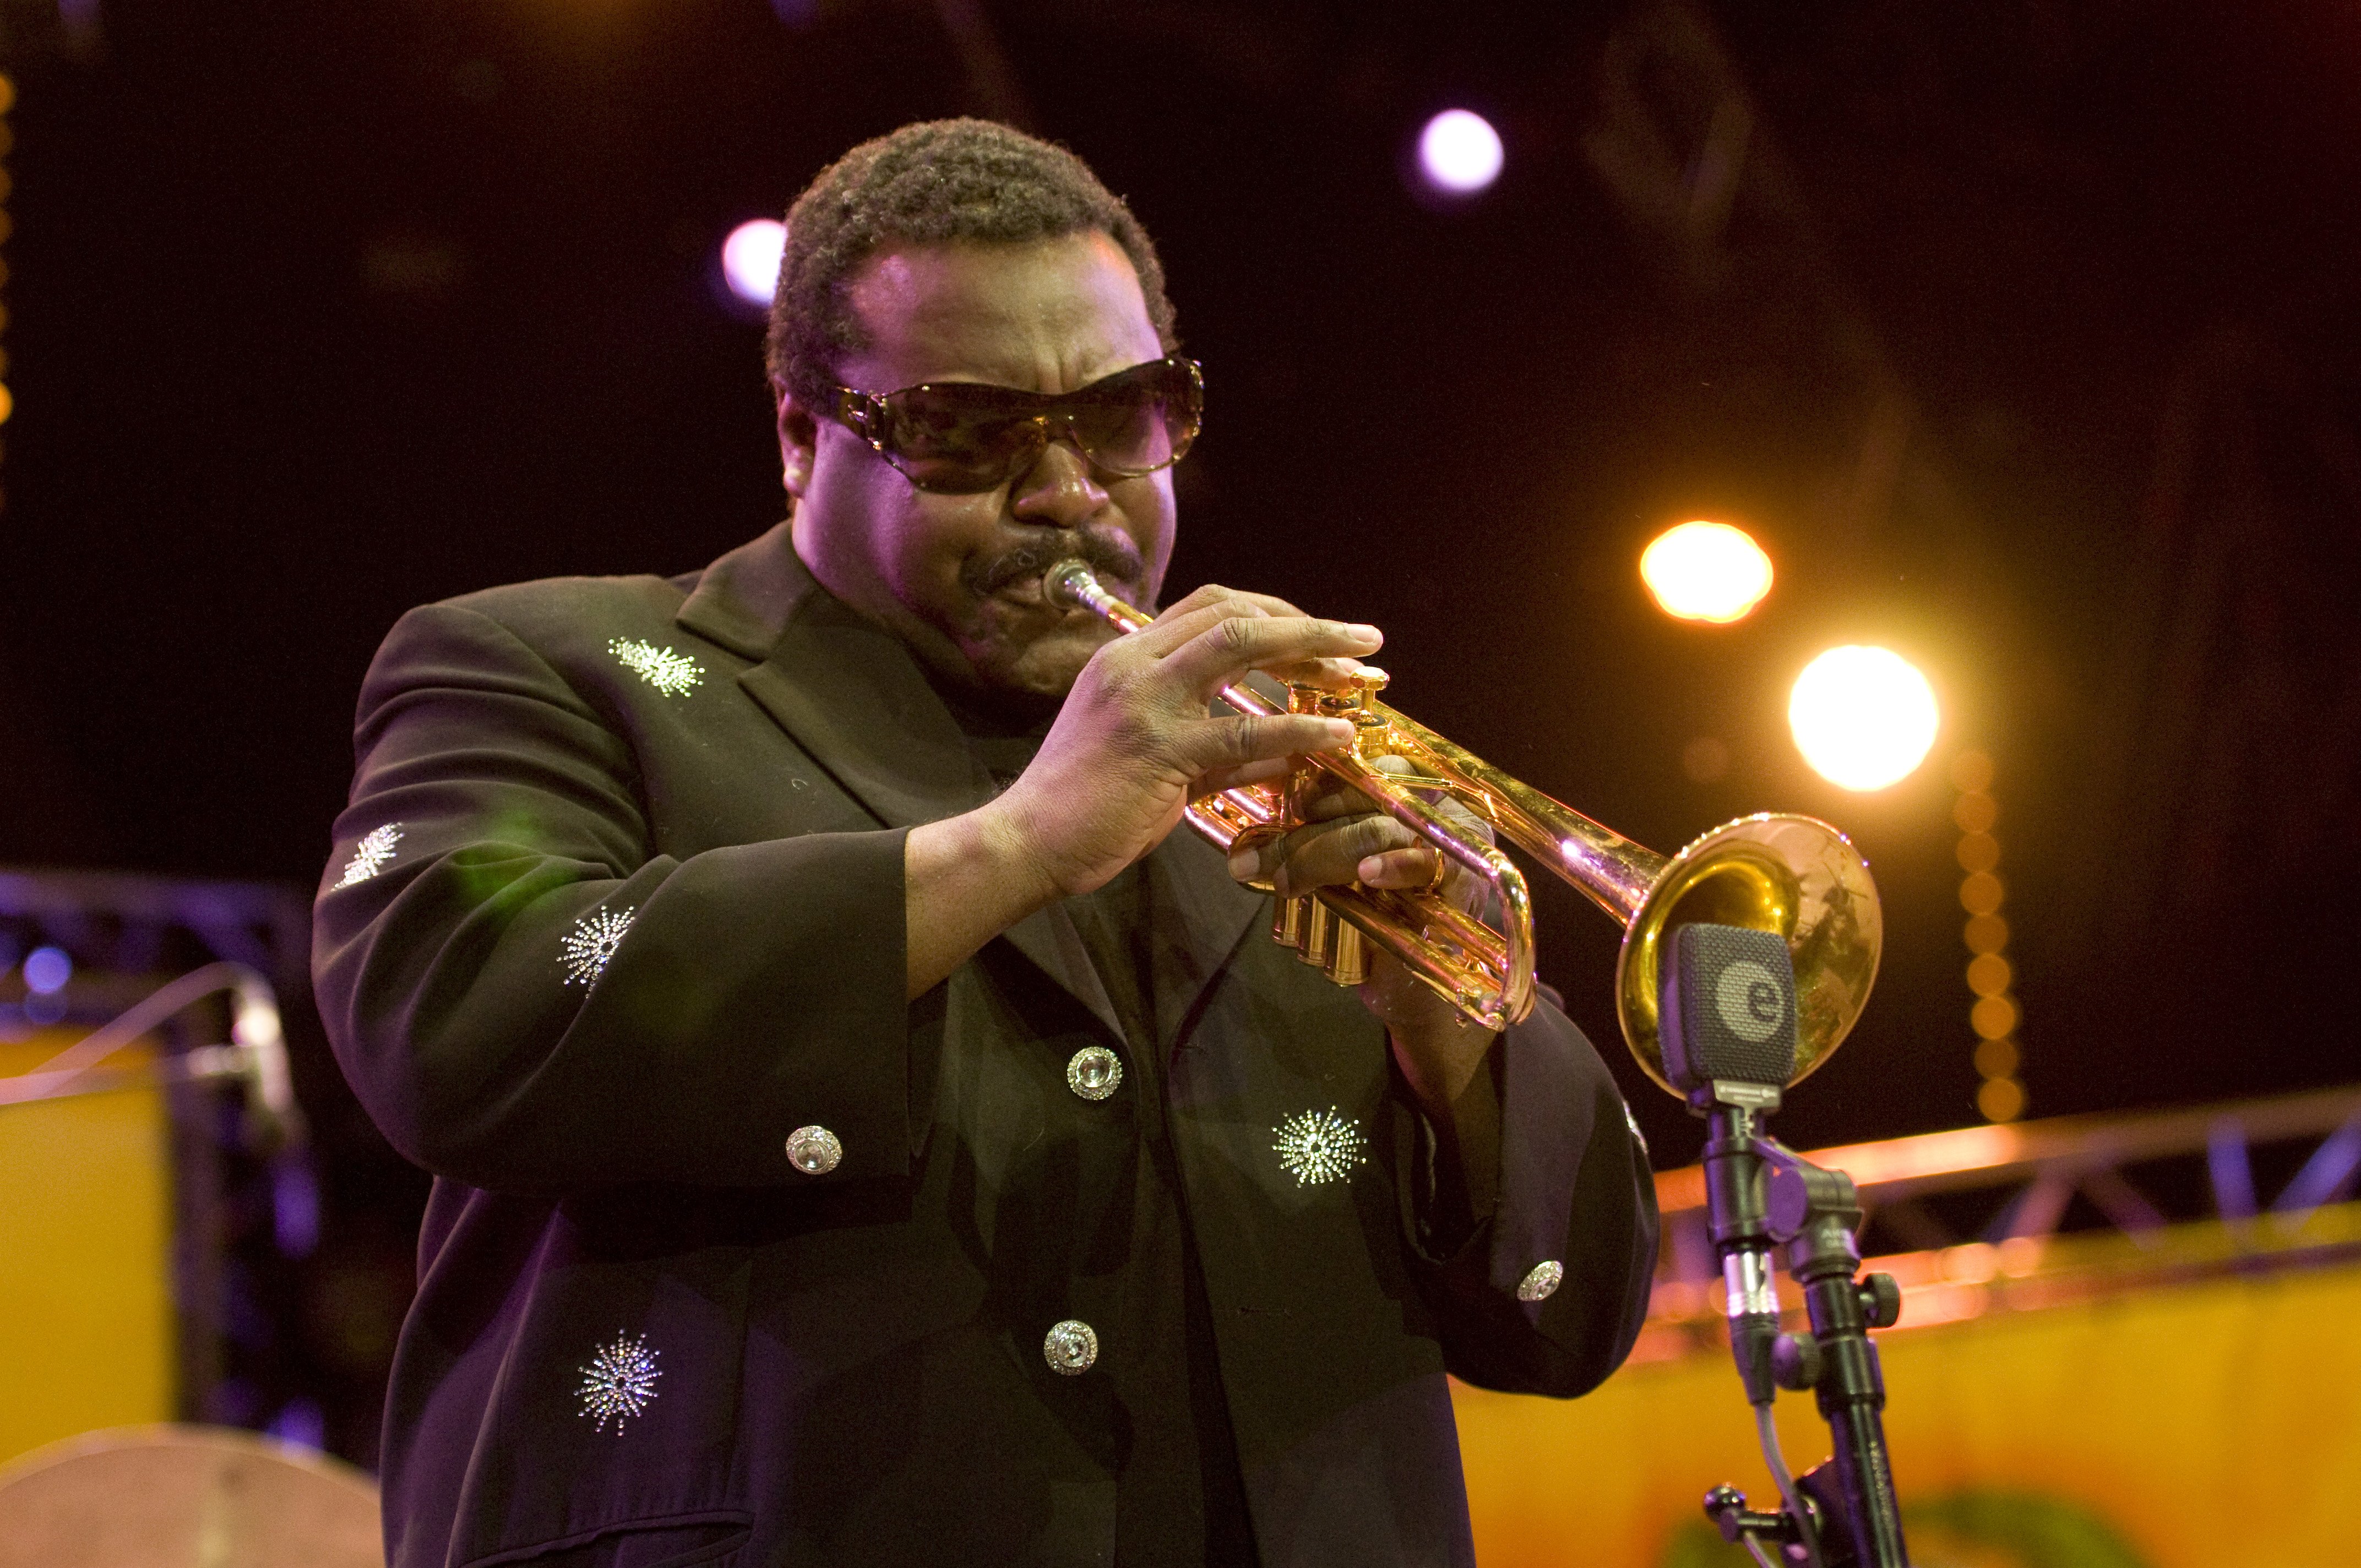 Wallace Roney performs on stage in Vienne, France on July 2, 2011. | Source: Getty Images.